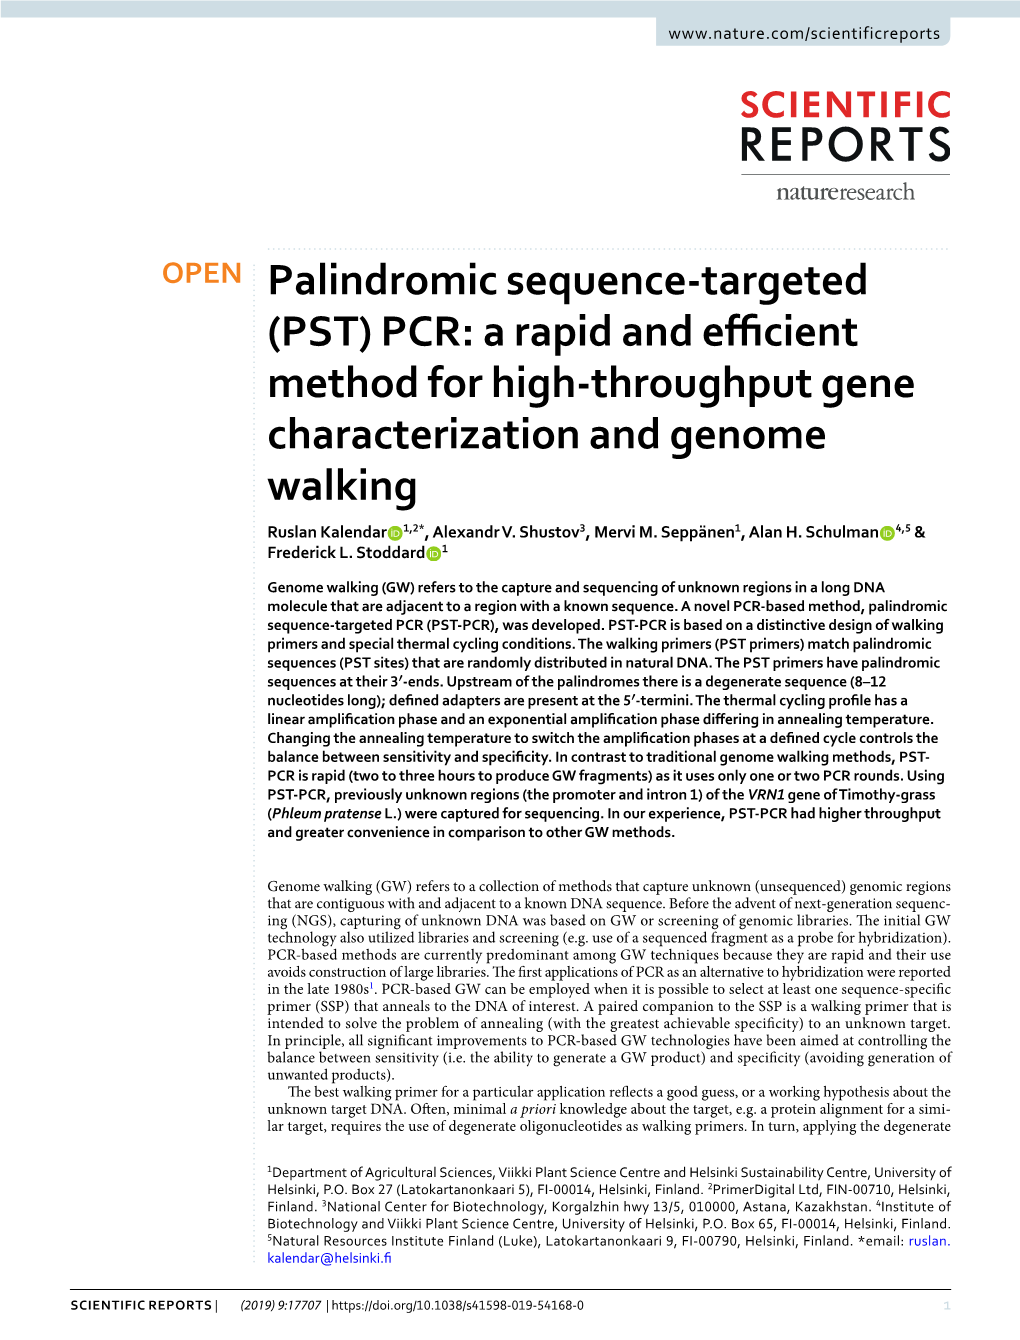 Palindromic Sequence-Targeted (PST) PCR: a Rapid and Efcient Method for High-Throughput Gene Characterization and Genome Walking Ruslan Kalendar 1,2*, Alexandr V